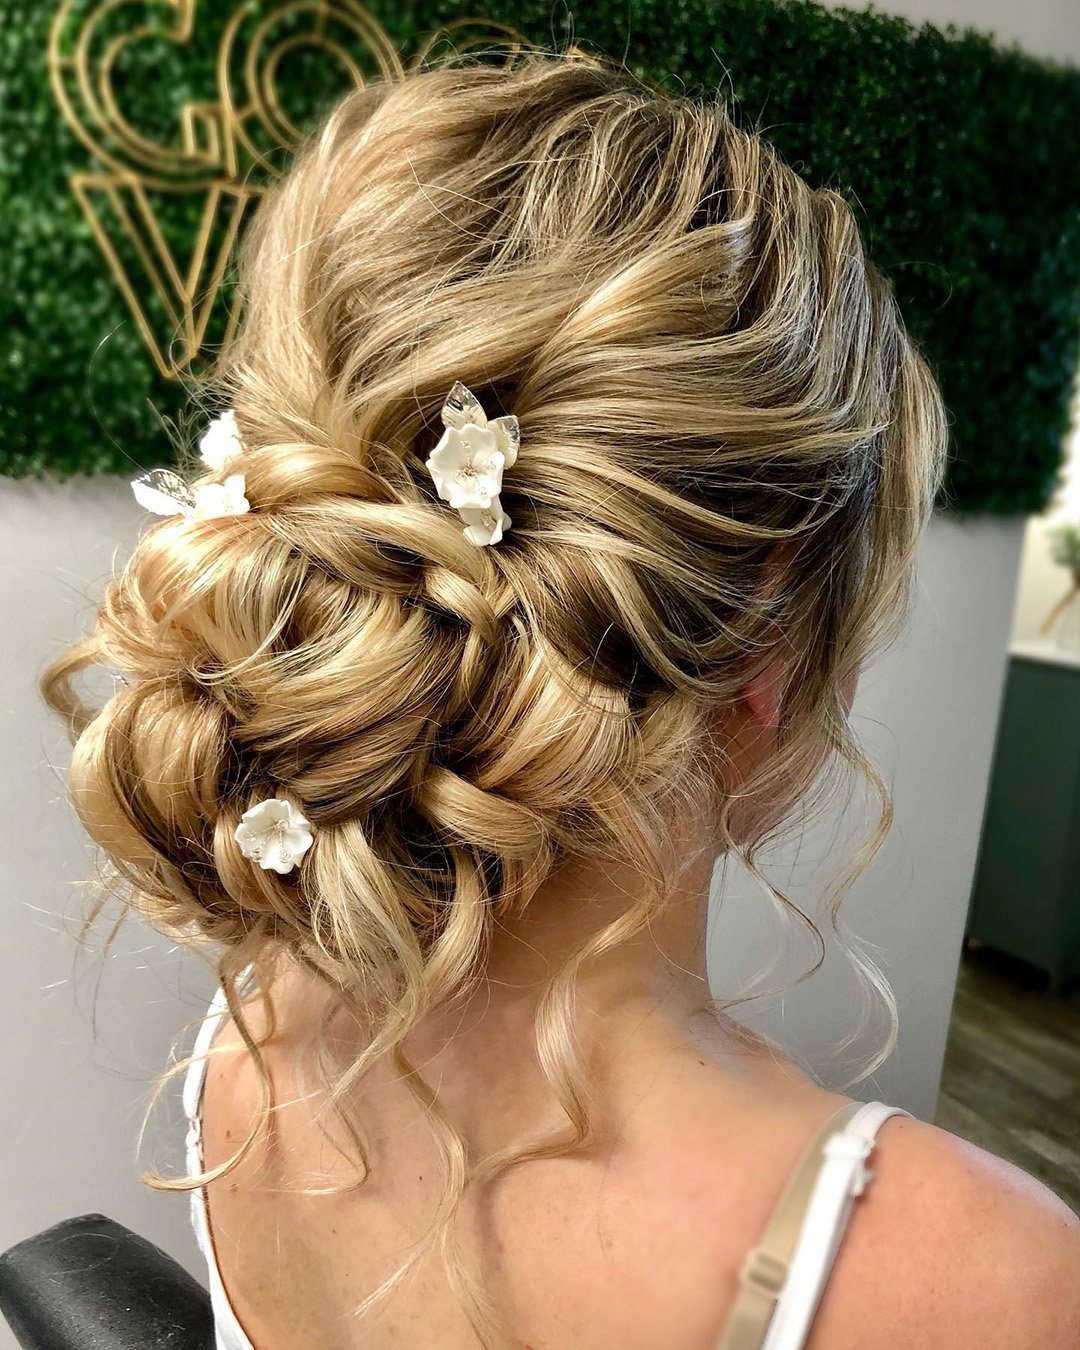 spring wedding hairstyles low bun with loose curls alexandralee1016